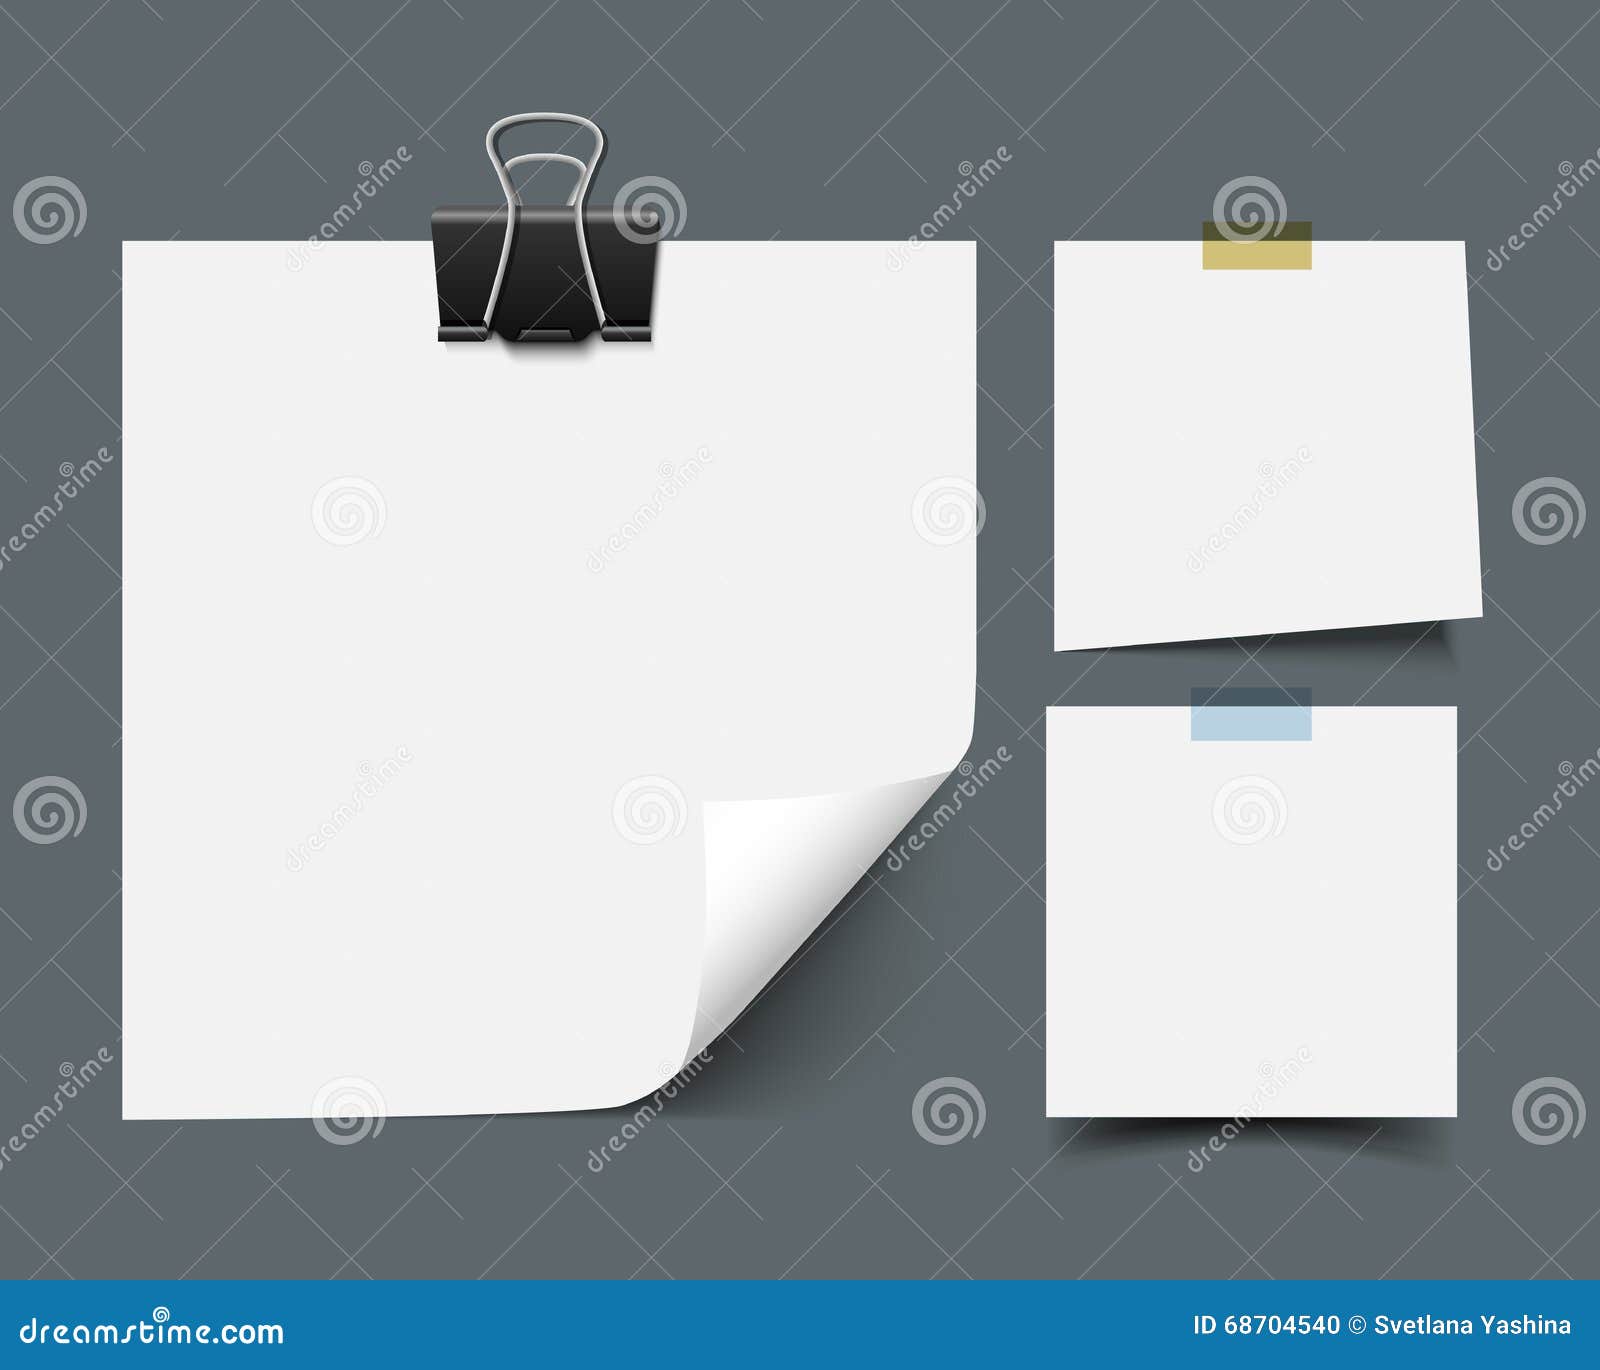 White sticky note paper sheets. White blank sticky note paper sheets with curled corners with scotch tape and paper clip isolated on dark background. Realistic vector illustration of paper notes. Reminder paper